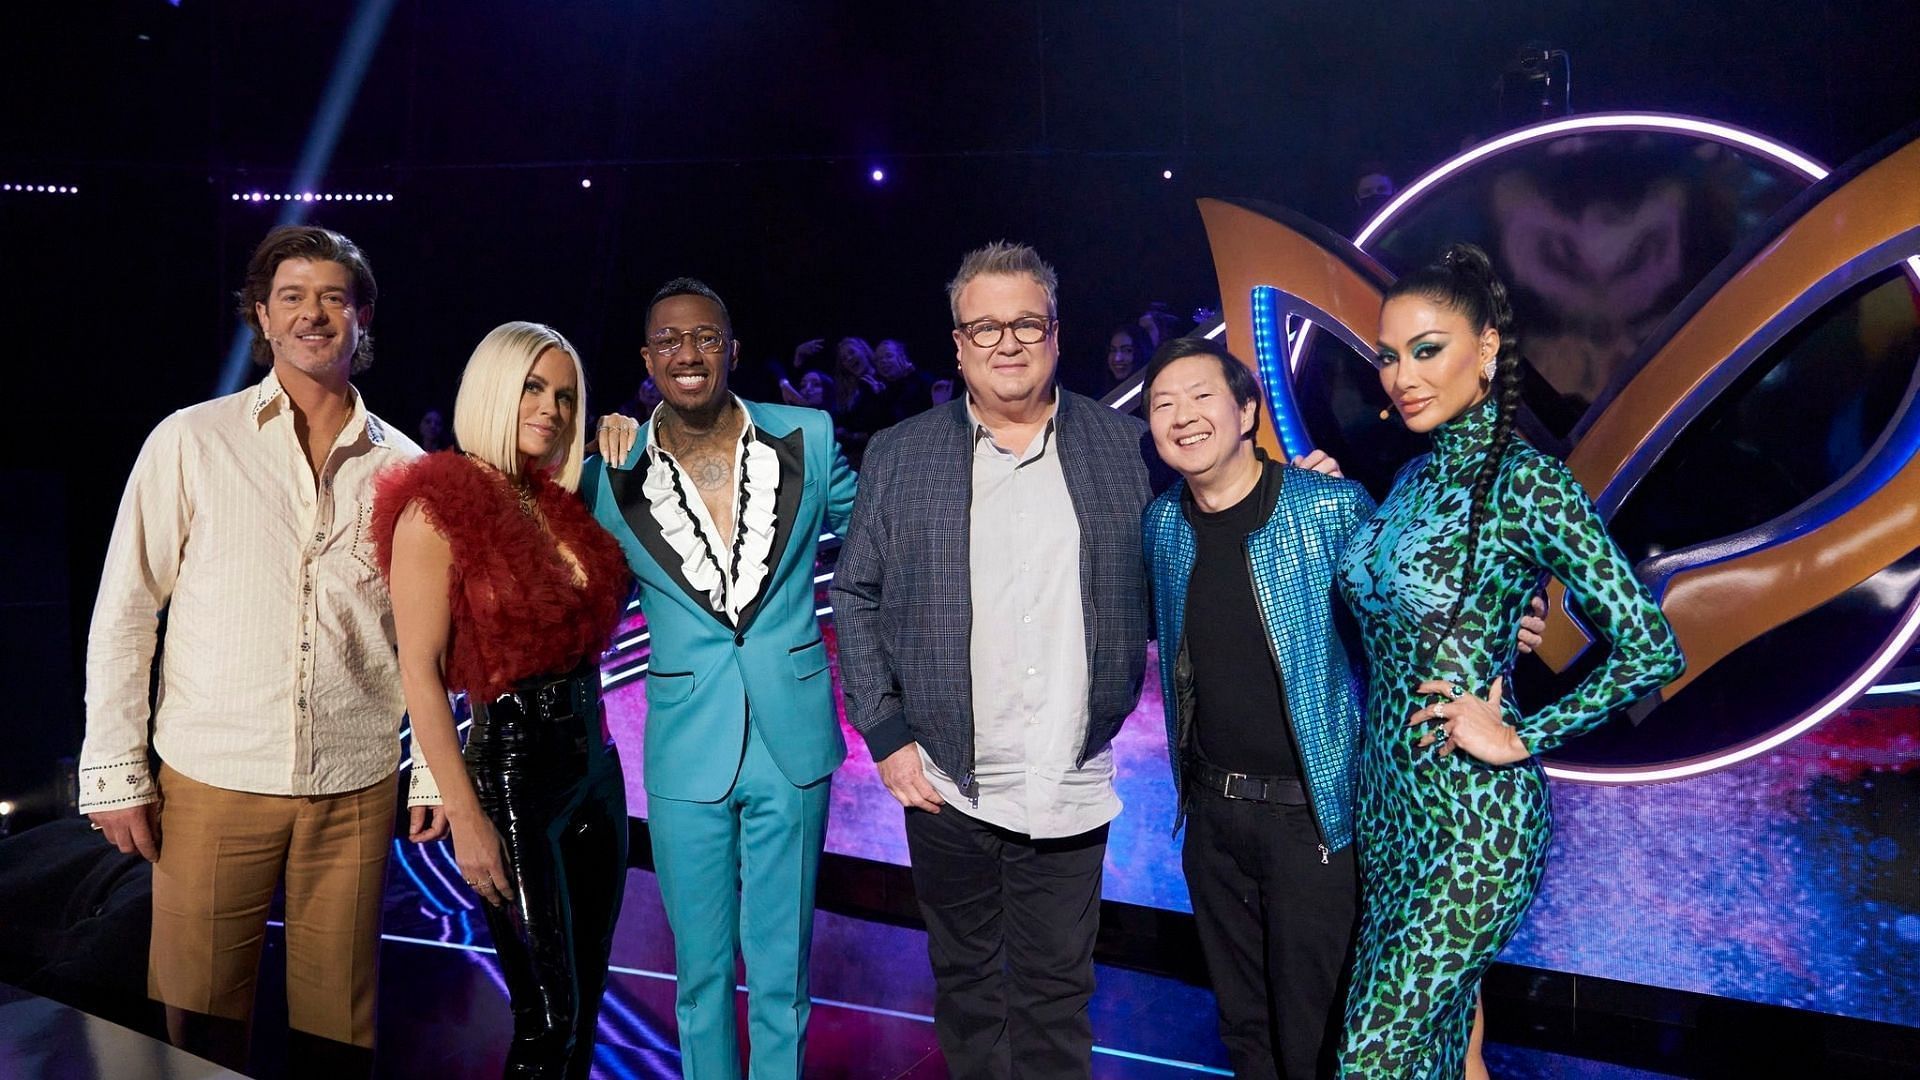 The Masked Singer sees another elimination on Episode 2 with guest panelist Eric Stonestreet (Image via @kenjeong/Twitter)